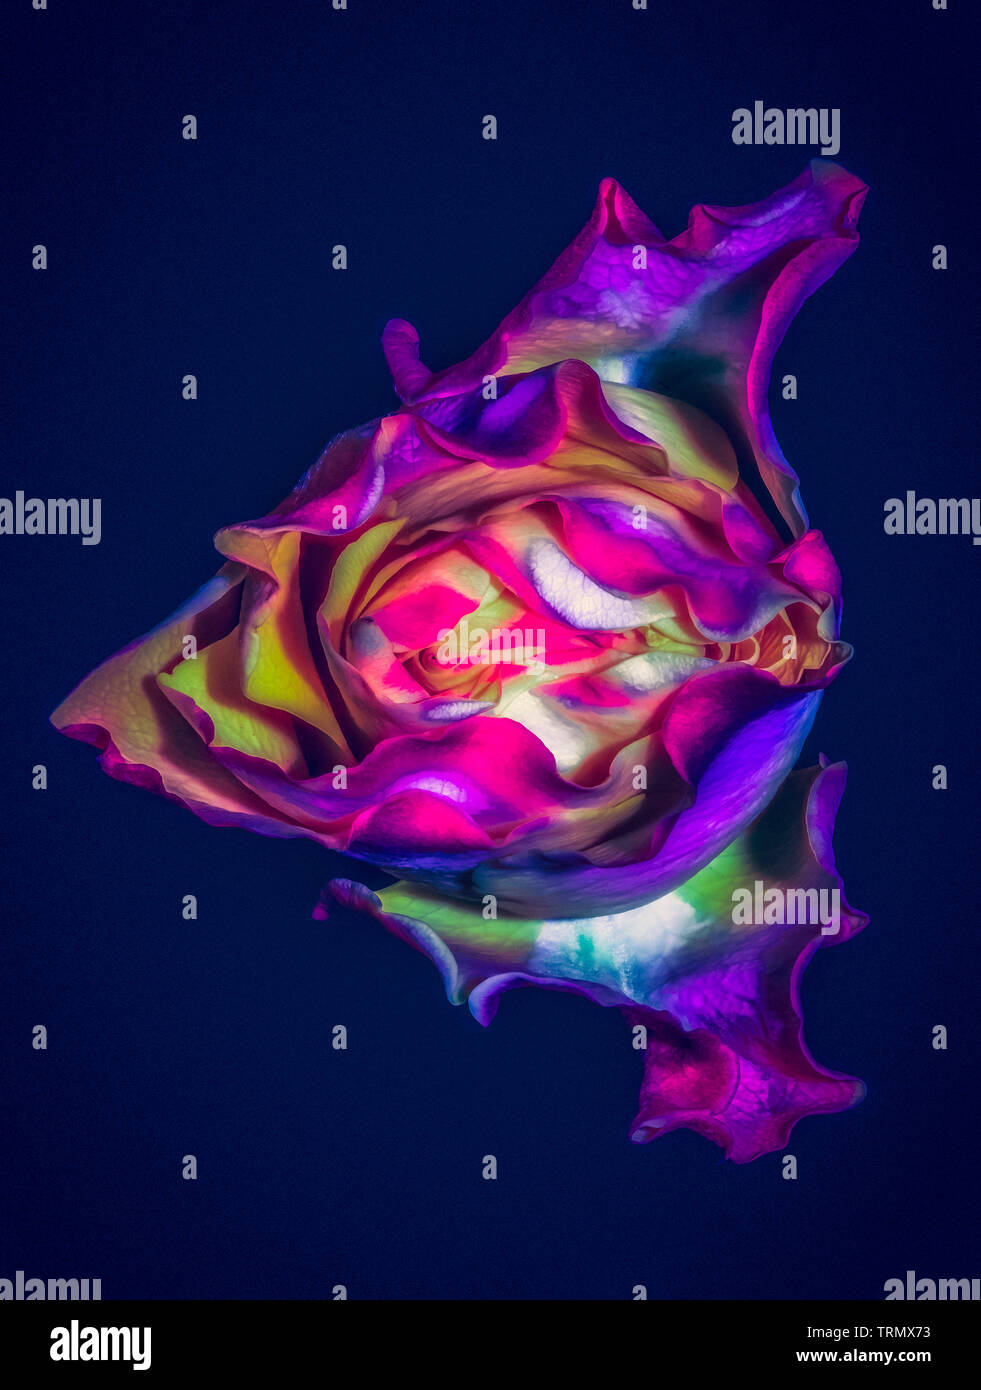 Surrealistic abstract fine art still life detailed rose portrait of pink violet yellow single isolated bloom with fine textures on blue background Stock Photo